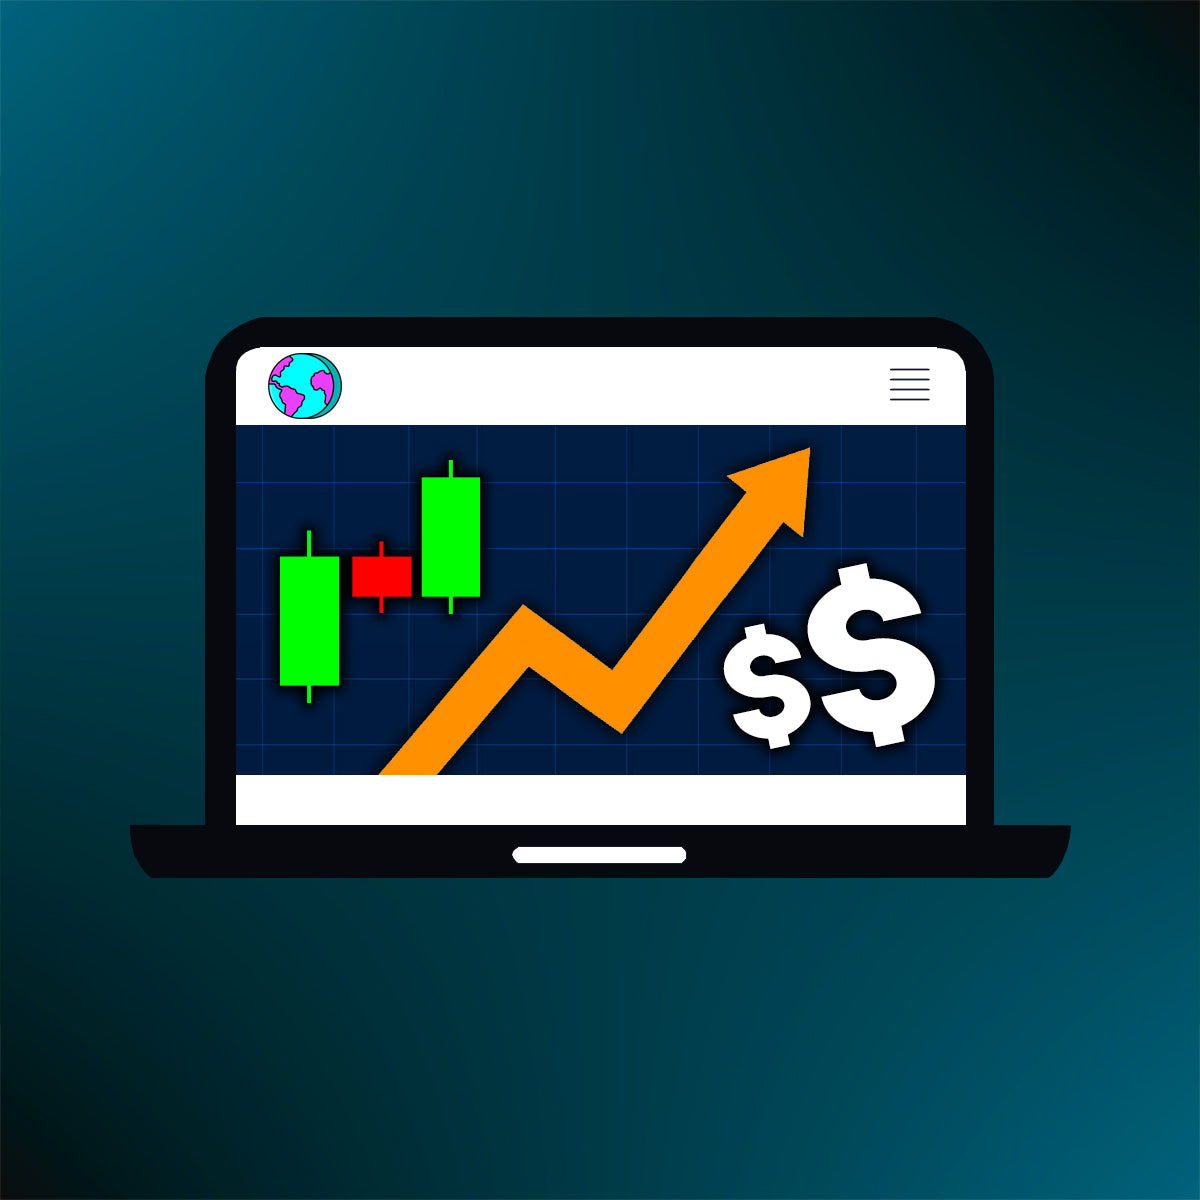 cryptocurrency technical analysis training